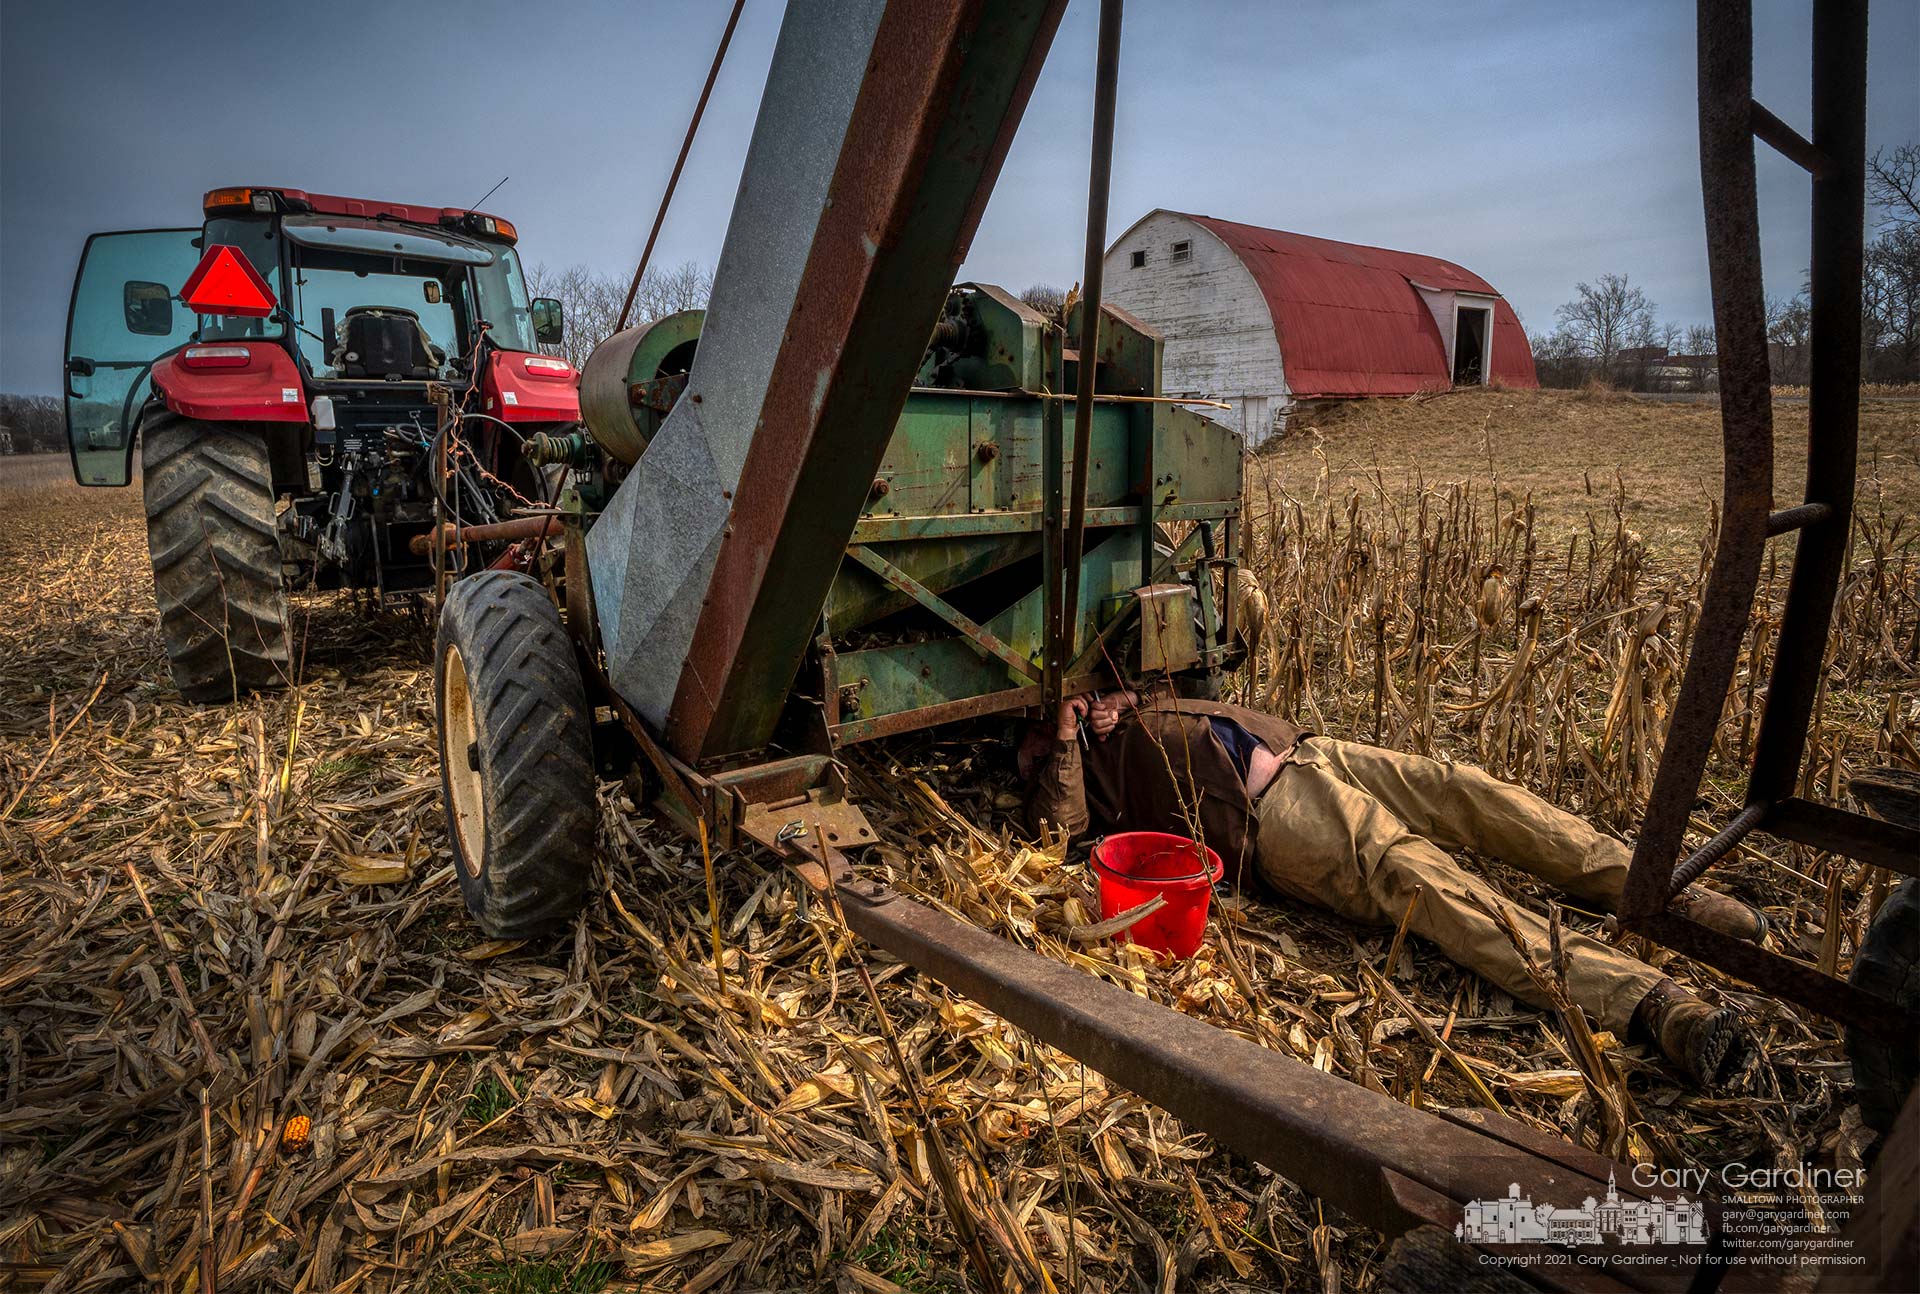 Kevin Scott repairs a broken chain drive on his one-row corn picker as he attempts to complete harvesting corn on the Braun Farm. My Final Photo for March 9, 2021.